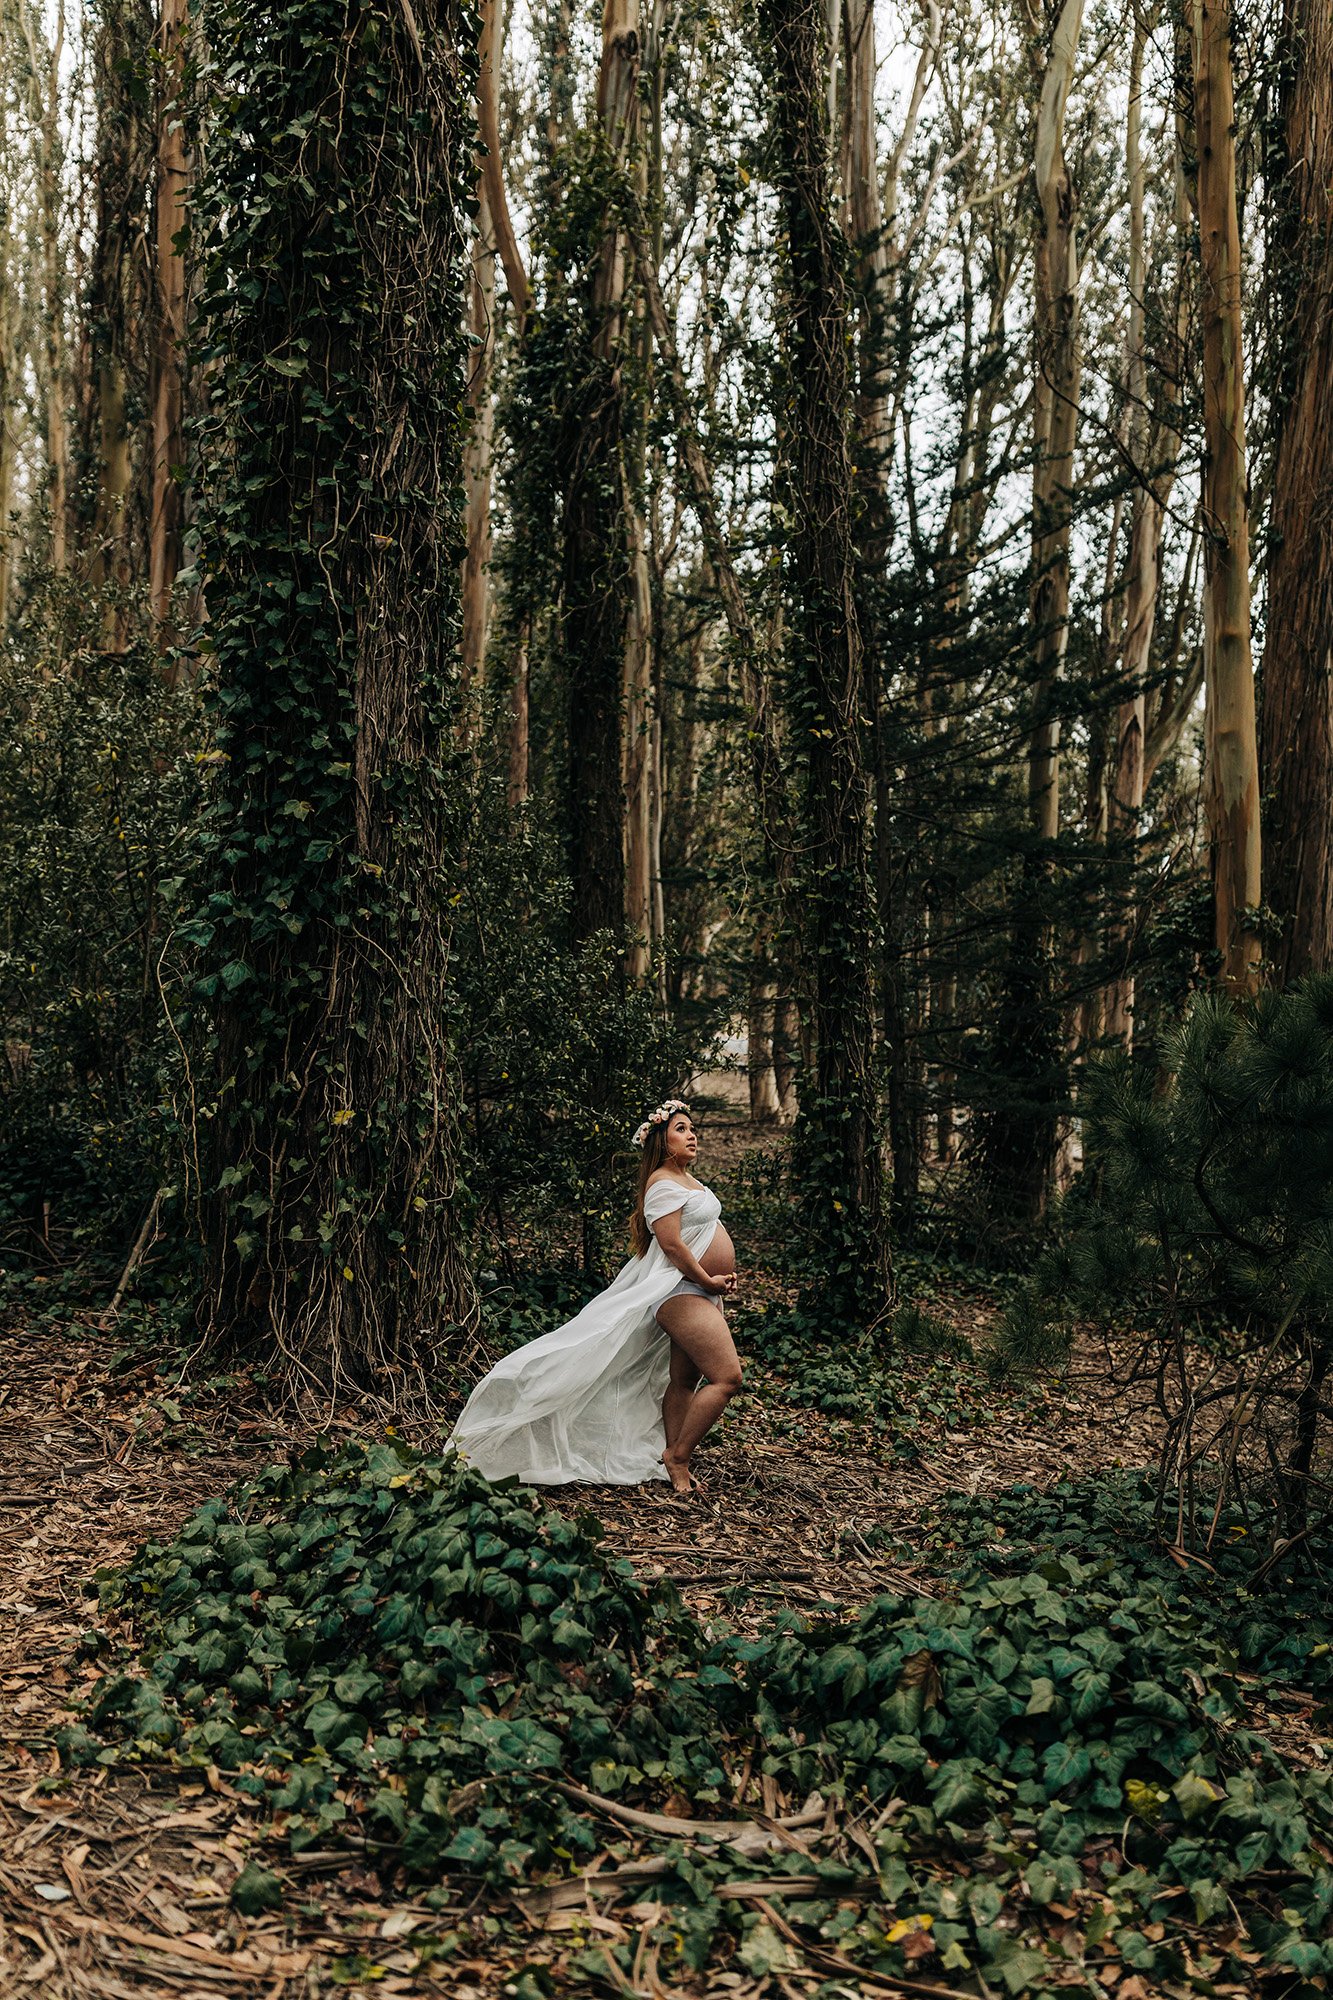 A pregnant woman stands in an iconic forest in San Francisco.